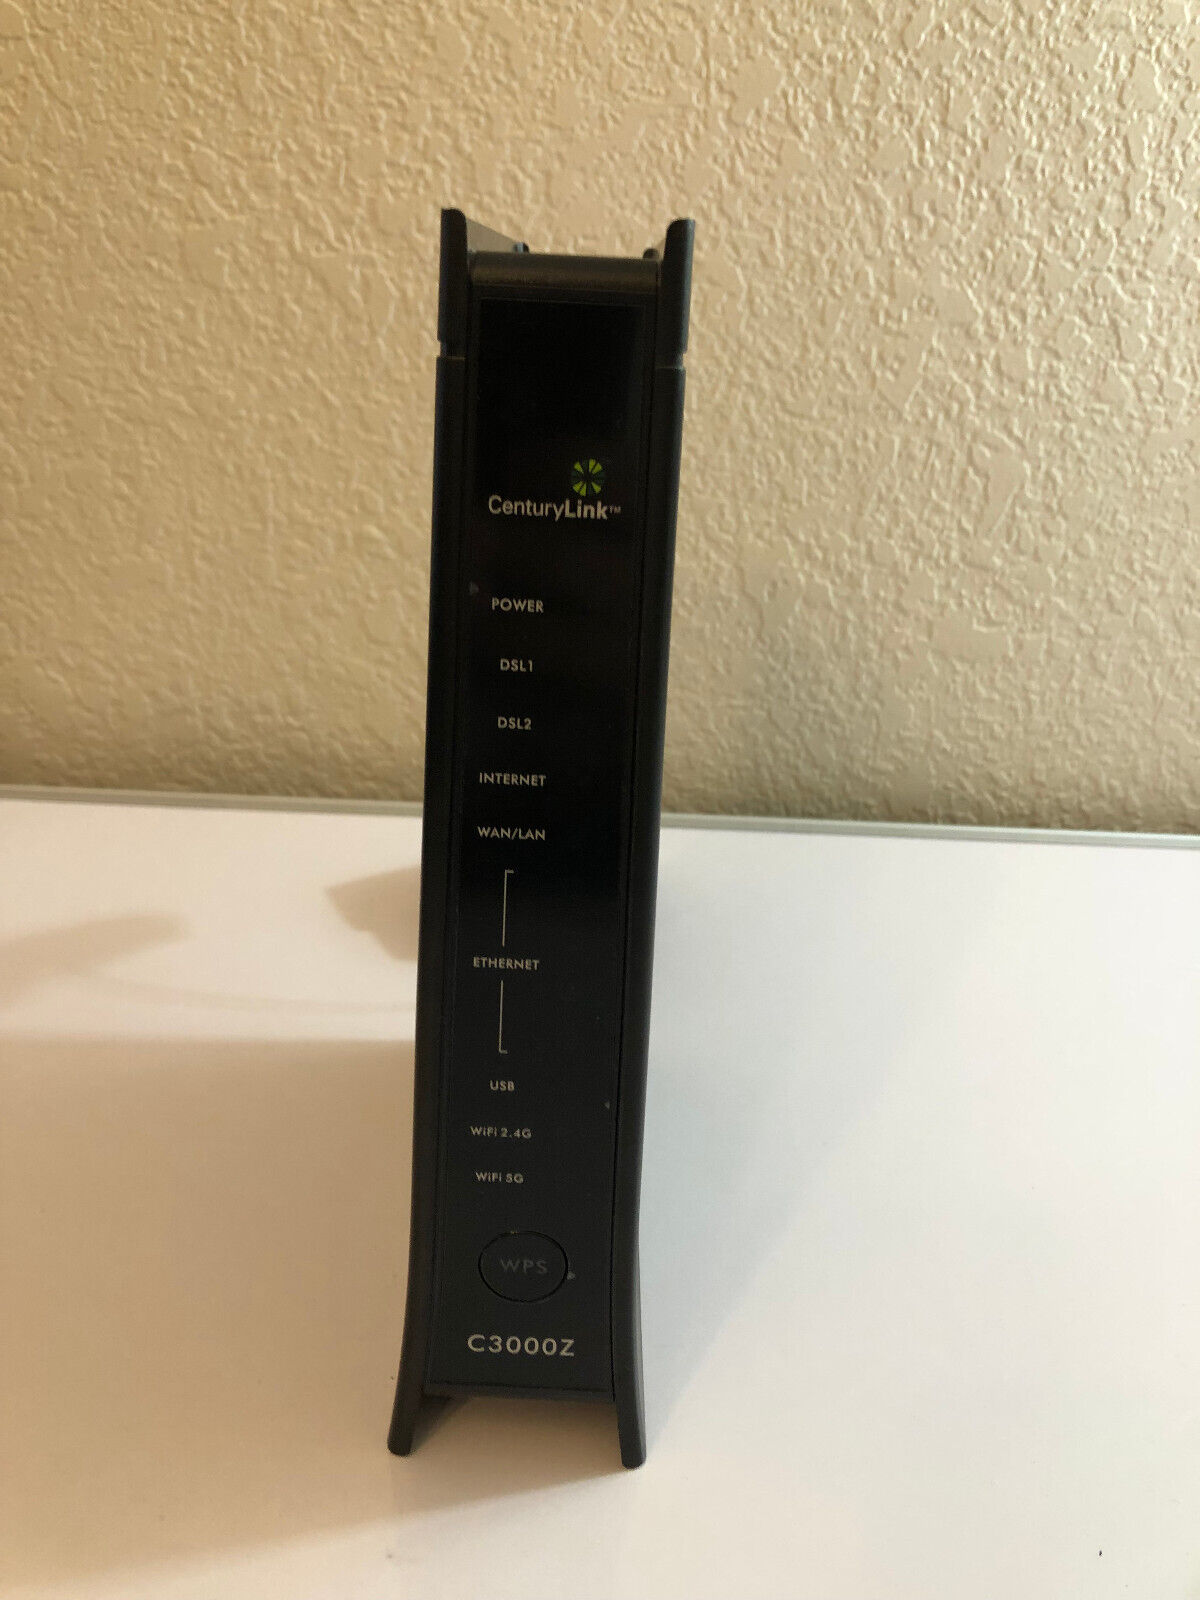 Century Link Zyxel C3000Z Modem Router Bundled with Power Adapter TESTED